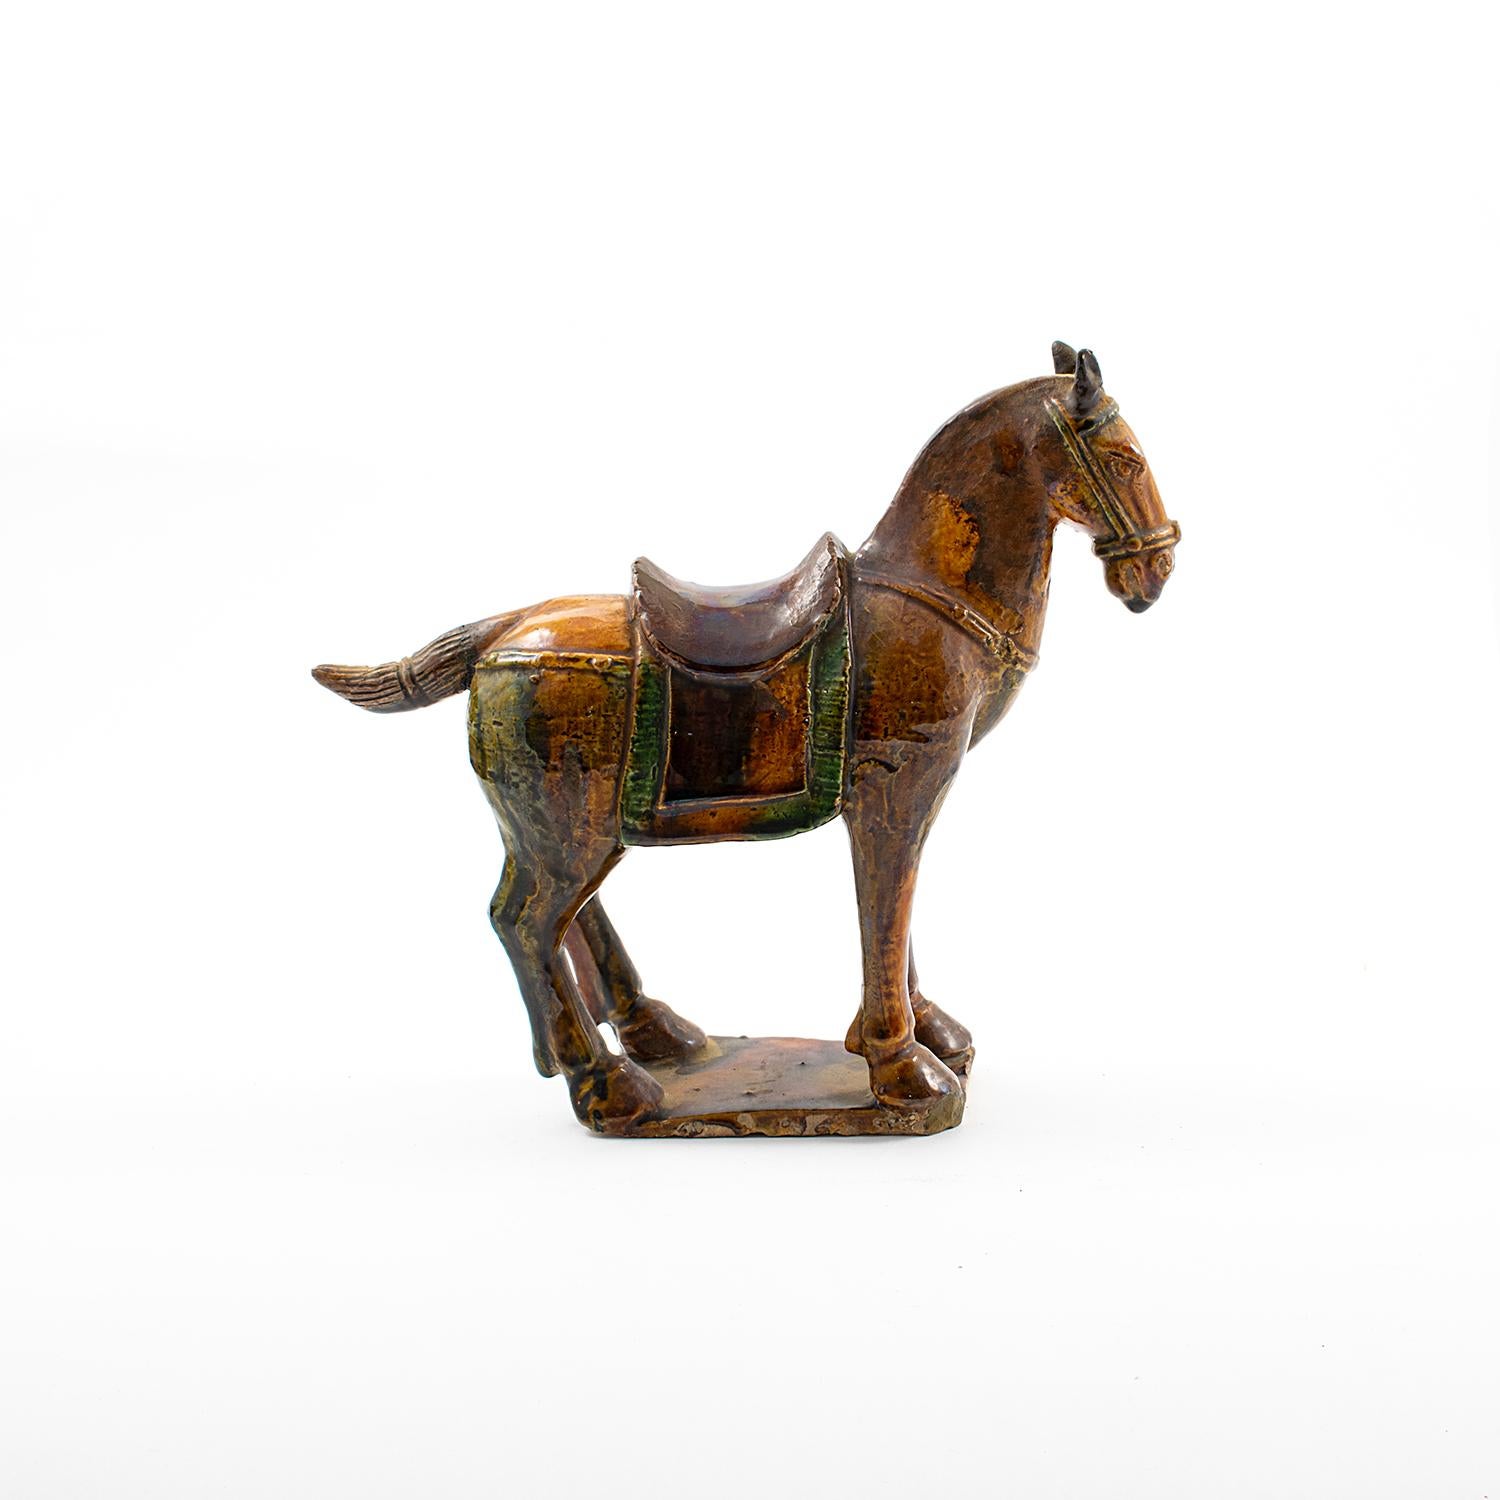 An elegant Chinese Ming dynasty pottery figurine depicting a horse in a standing pose with polychrome finish (aubergine, light brown and green).
Ming Dynasty period, dated 1386-1644 A.D. Comes with a certificate of authenticity.
Sold in Hong Kong